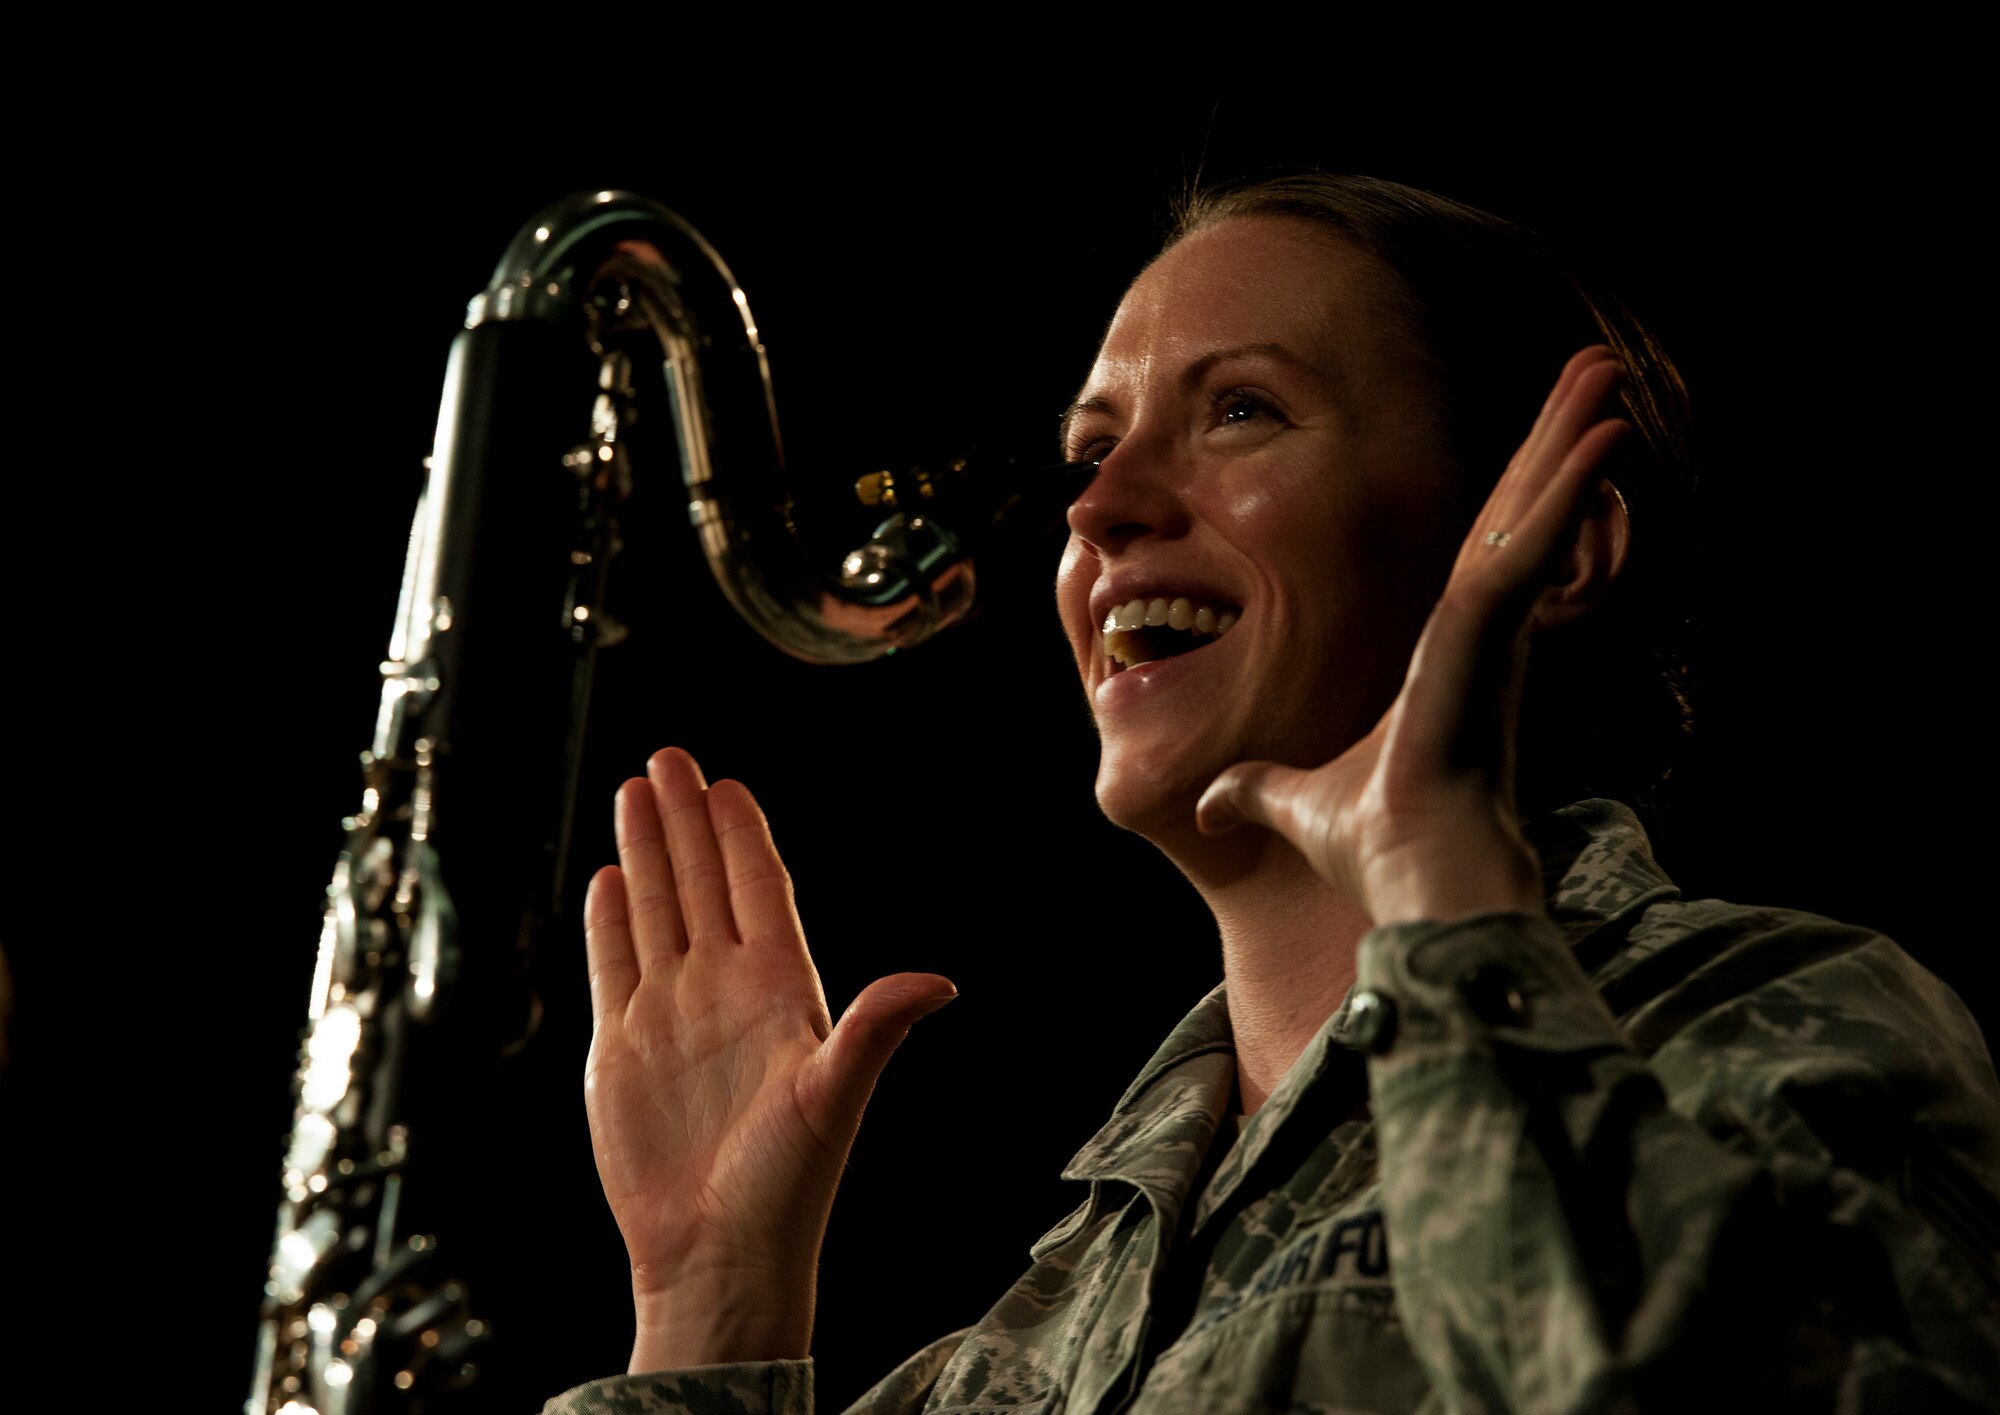 Staff Sgt. Chantelle Friedman, regional band clarinet player for the U.S. Air Forces in Europe Band, gives feedback on how the clarinet section sounds during a rehearsal, Oct. 30, 2013, Ramstein Air Base. The USAFE Band travels throughout Europe, Africa and the Middle East, strengthening the reputation of the Air Force. (U.S. Air Force photo/Senior Airman Damon Kasberg)